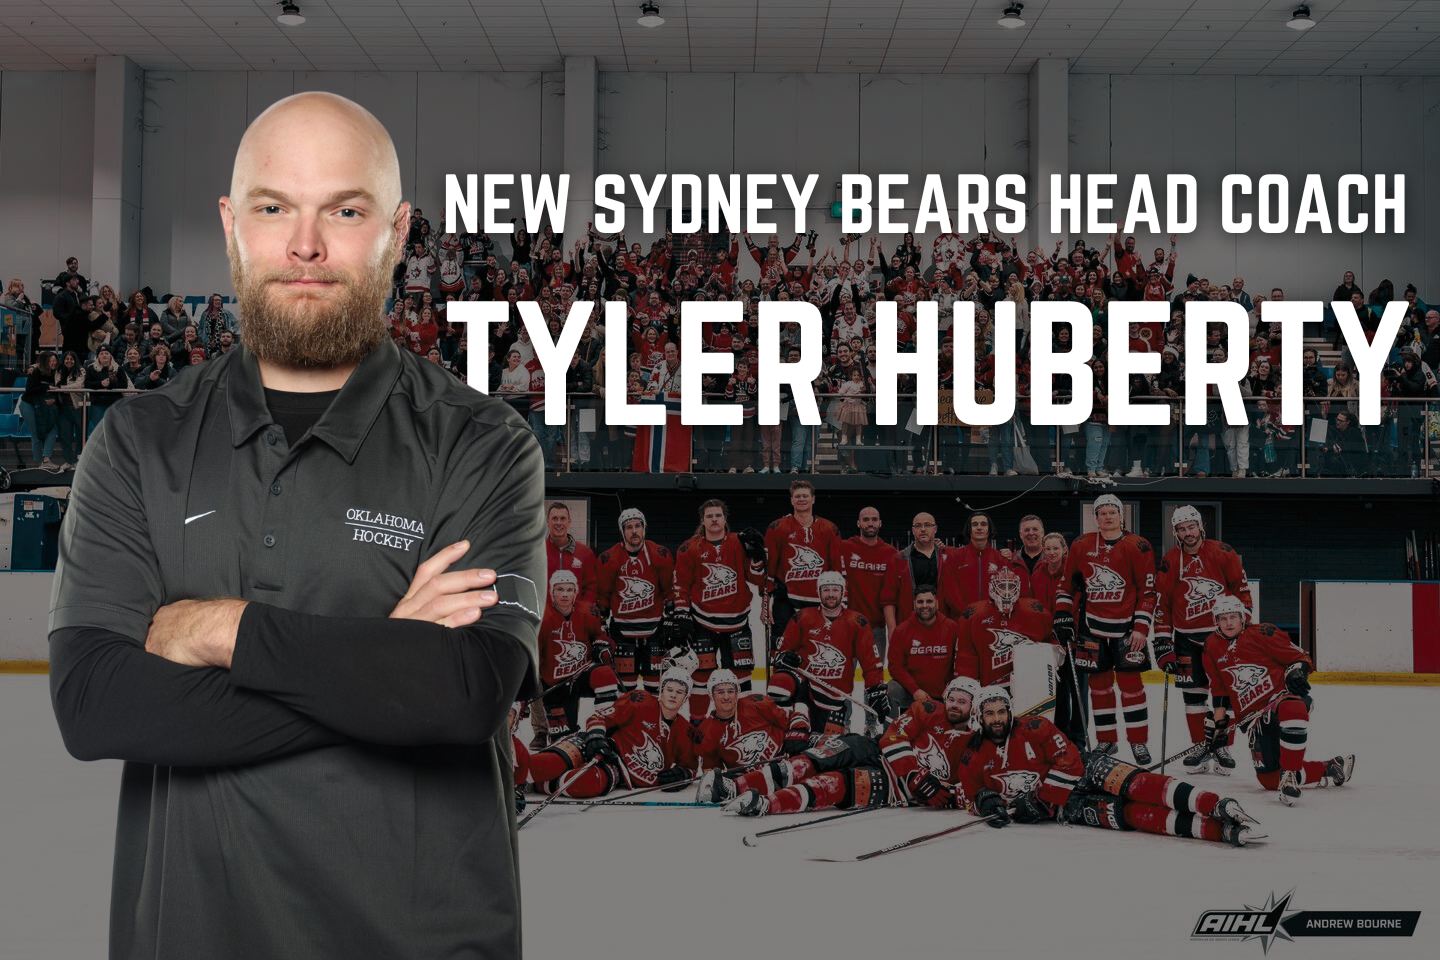 New Bears' Head Coach Tyler Huberty: 'I'm expecting our team to have a very successful season'